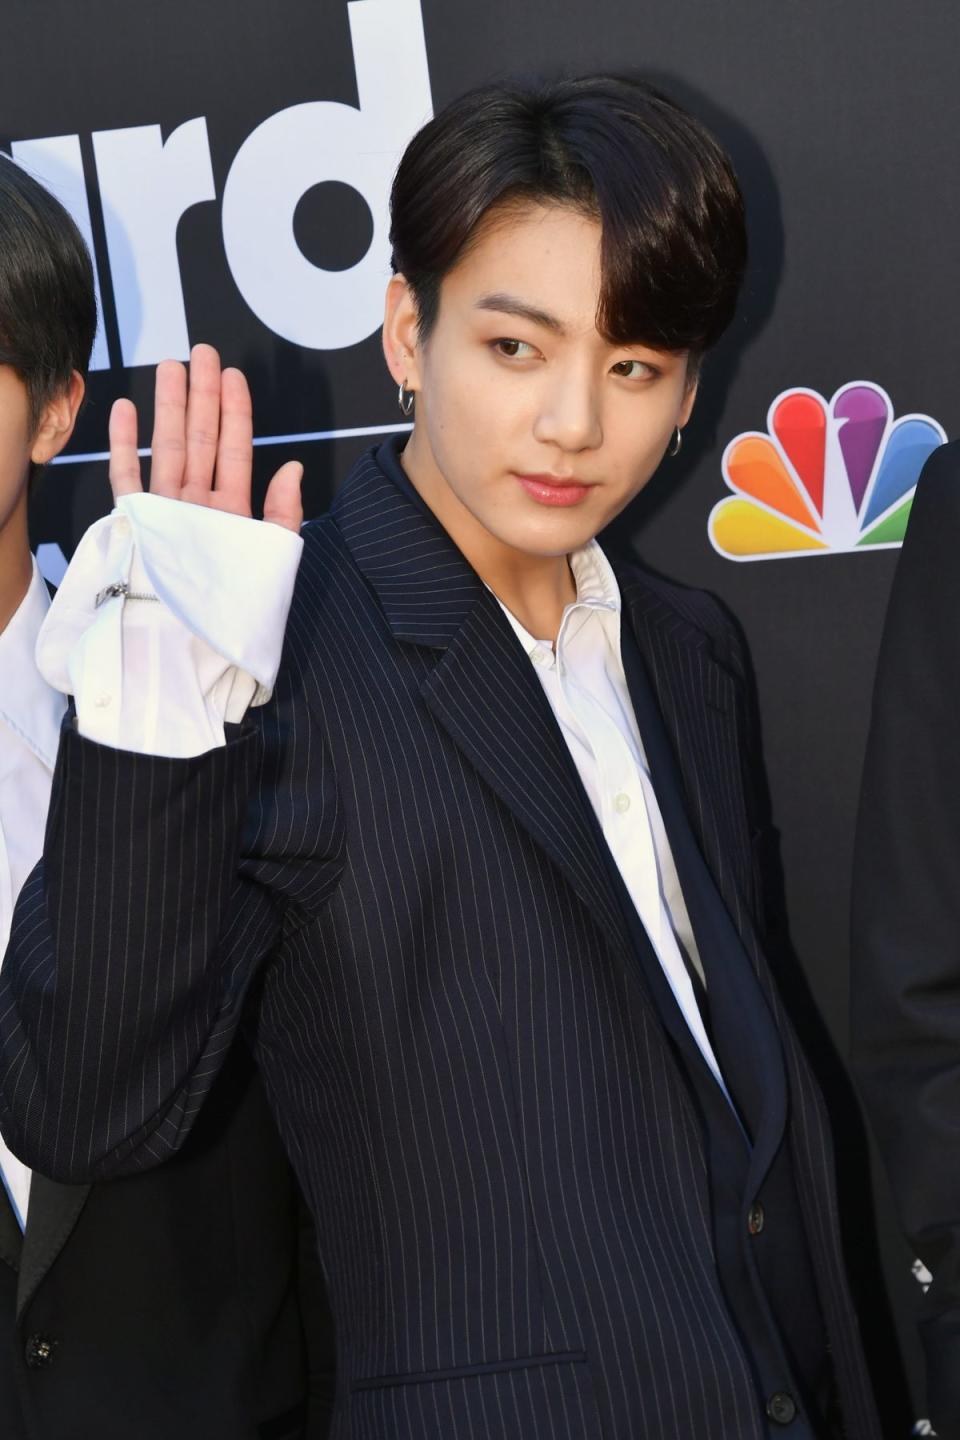 LAS VEGAS, NV - MAY 01: Jungkook of BTS attends the 2019 Billboard Music Awards at MGM Grand Garden Arena on May 1, 2019 in Las Vegas, Nevada. (Photo by Jeff Kravitz/FilmMagic for dcp)